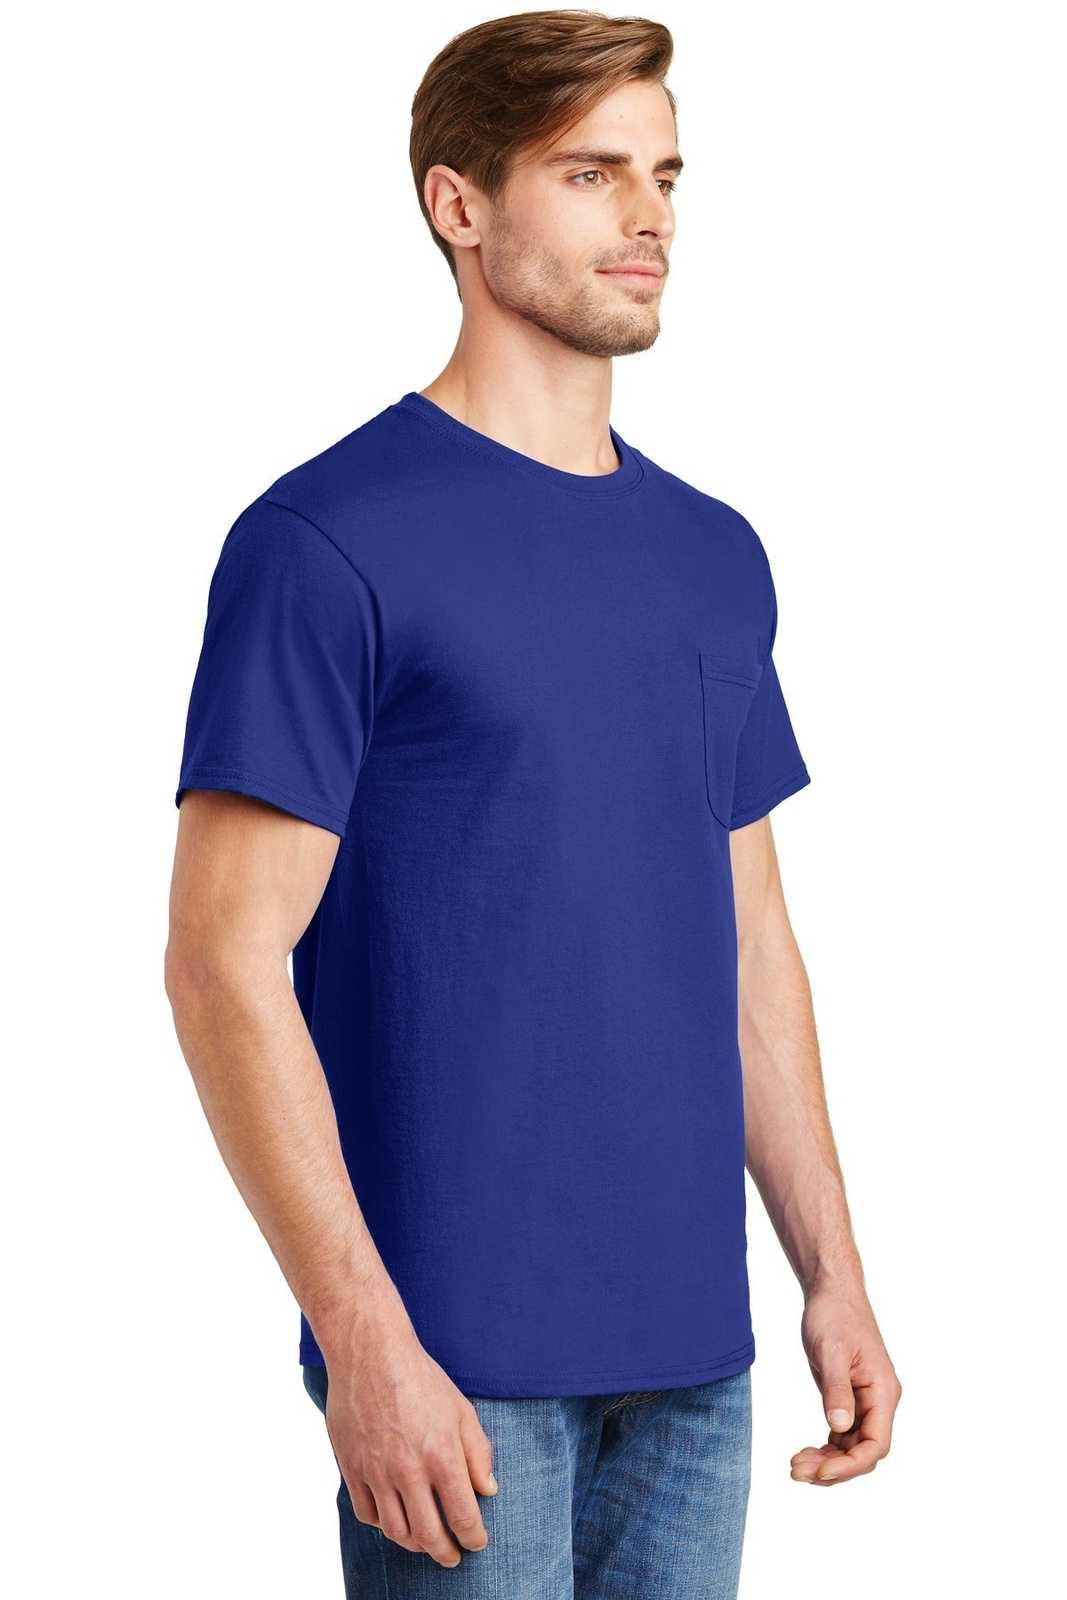 Hanes 5590 Tagless 100% Cotton T-Shirt with Pocket - Deep Royal - HIT a Double